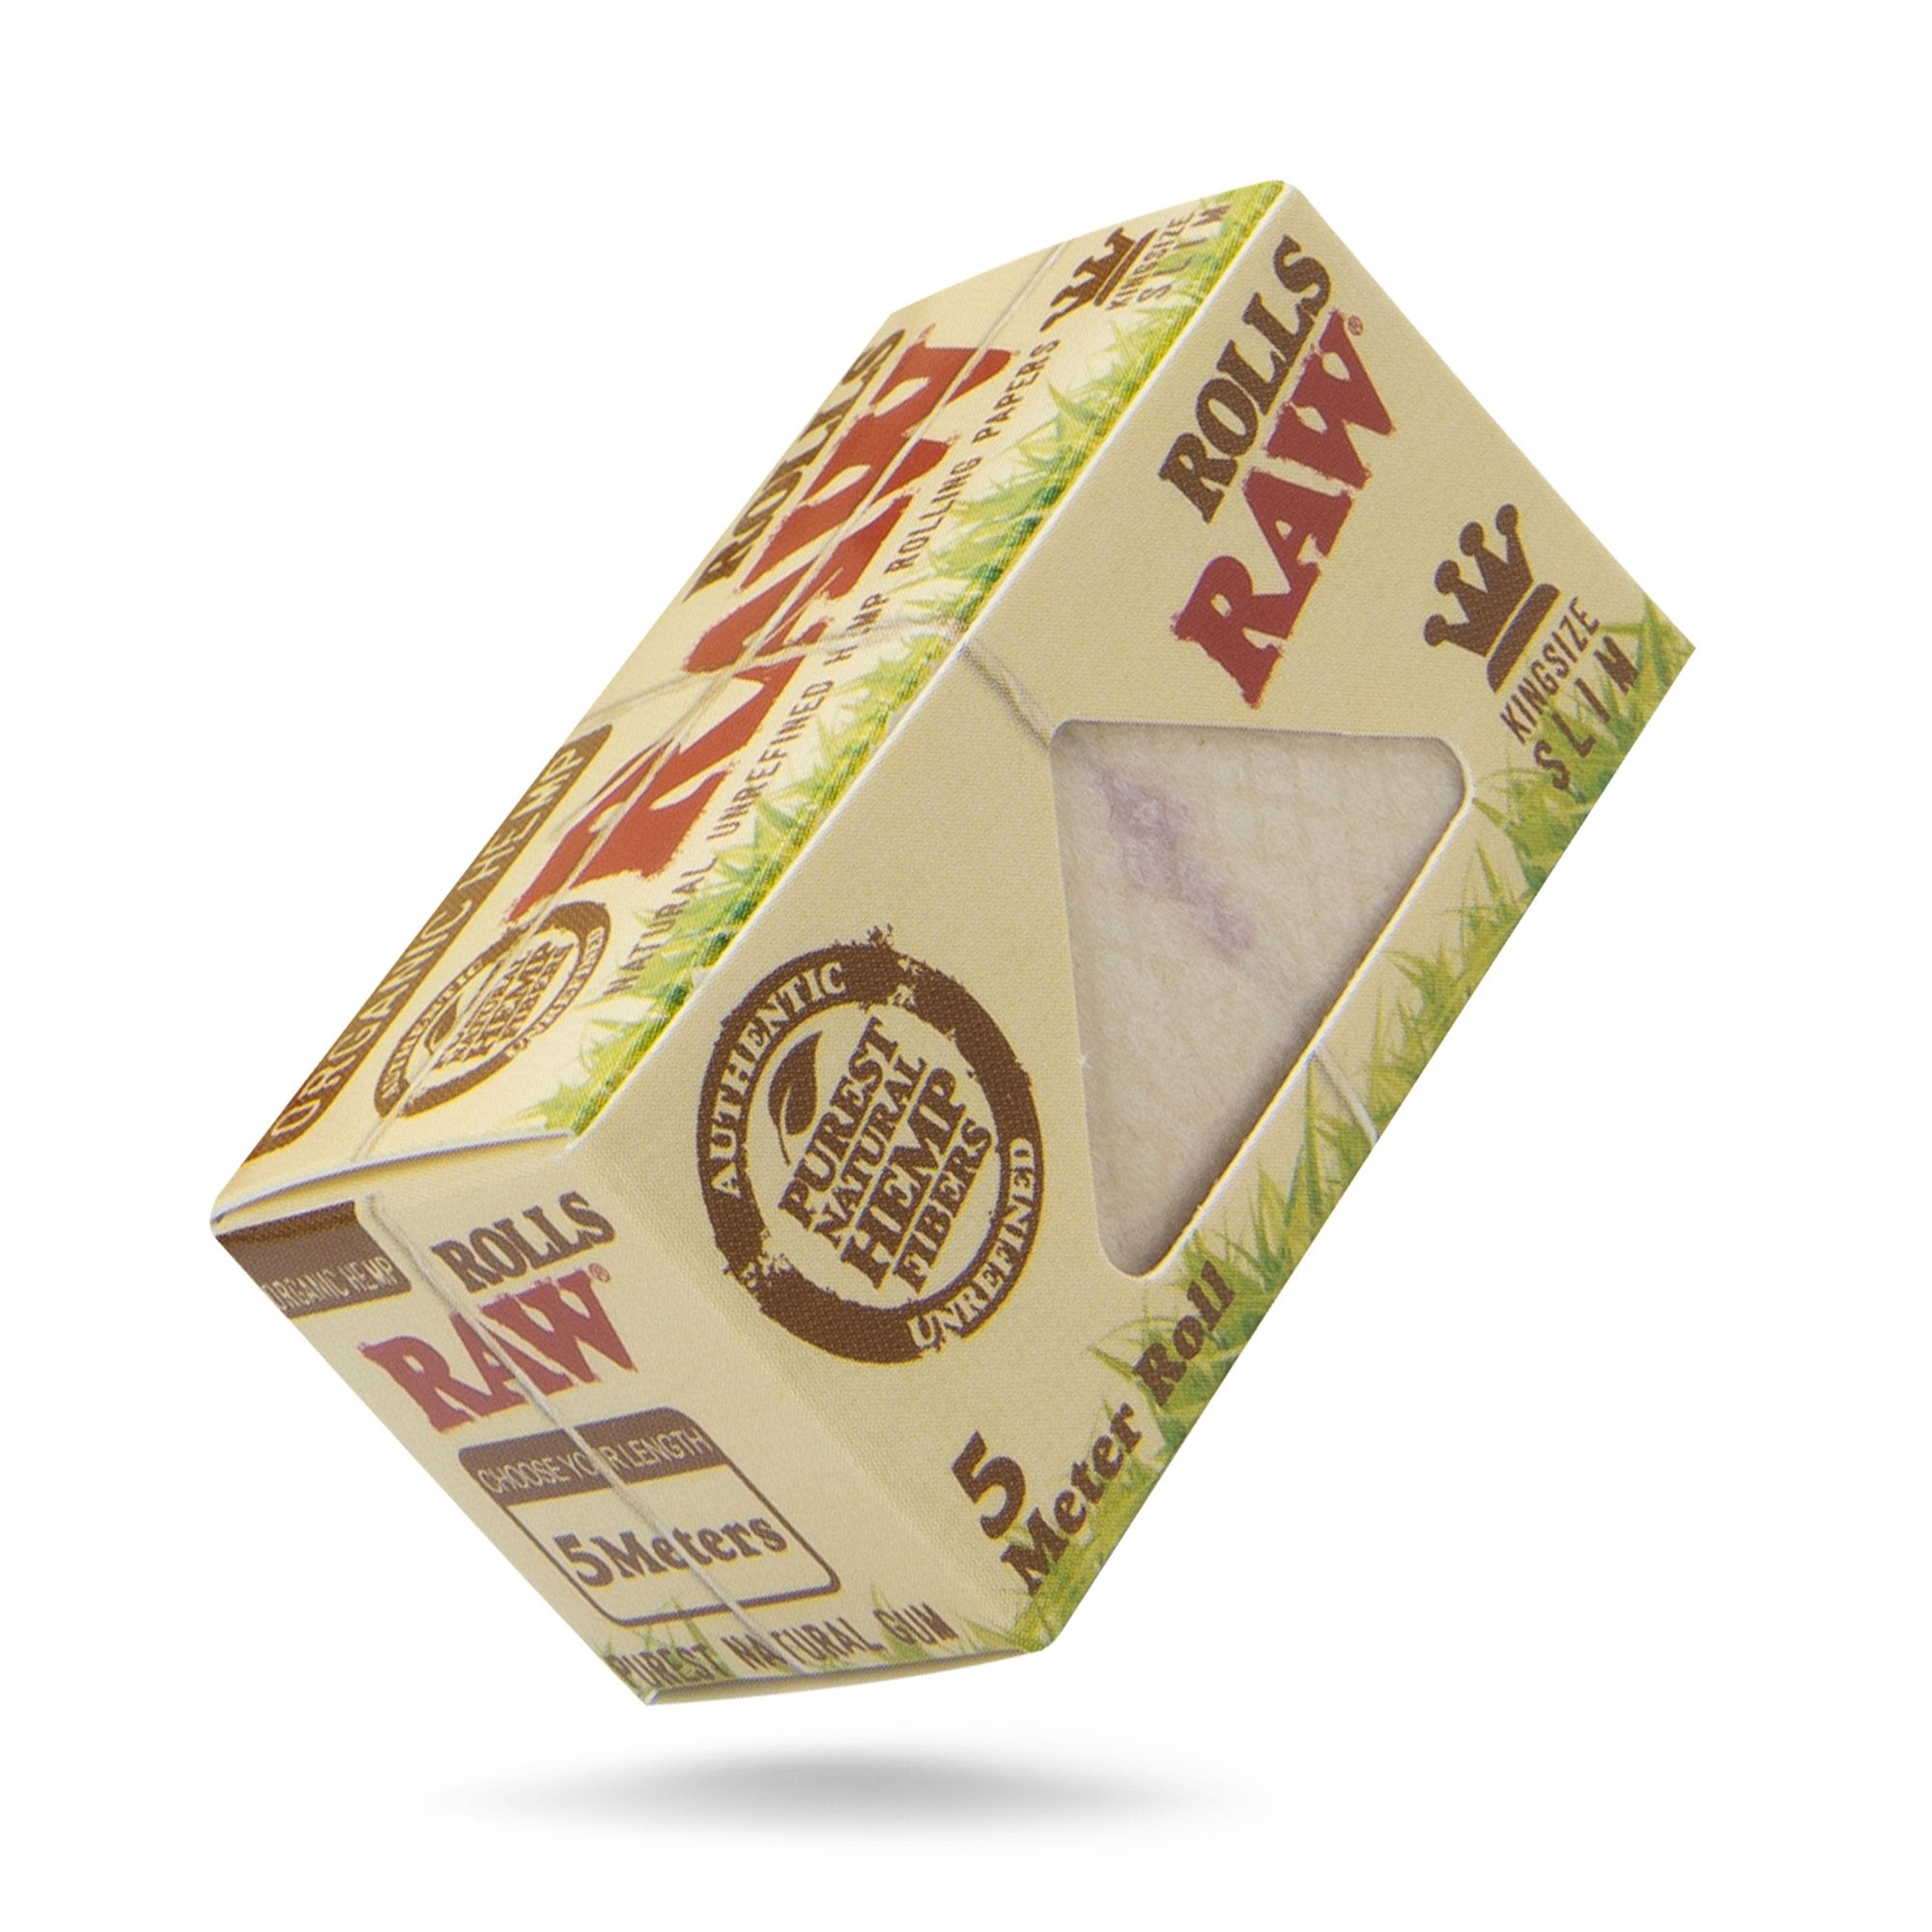 RAW Organic King Size Slim Paper Rolls - 5 Meters Rolling Papers WAR00377-1/24 esd-official